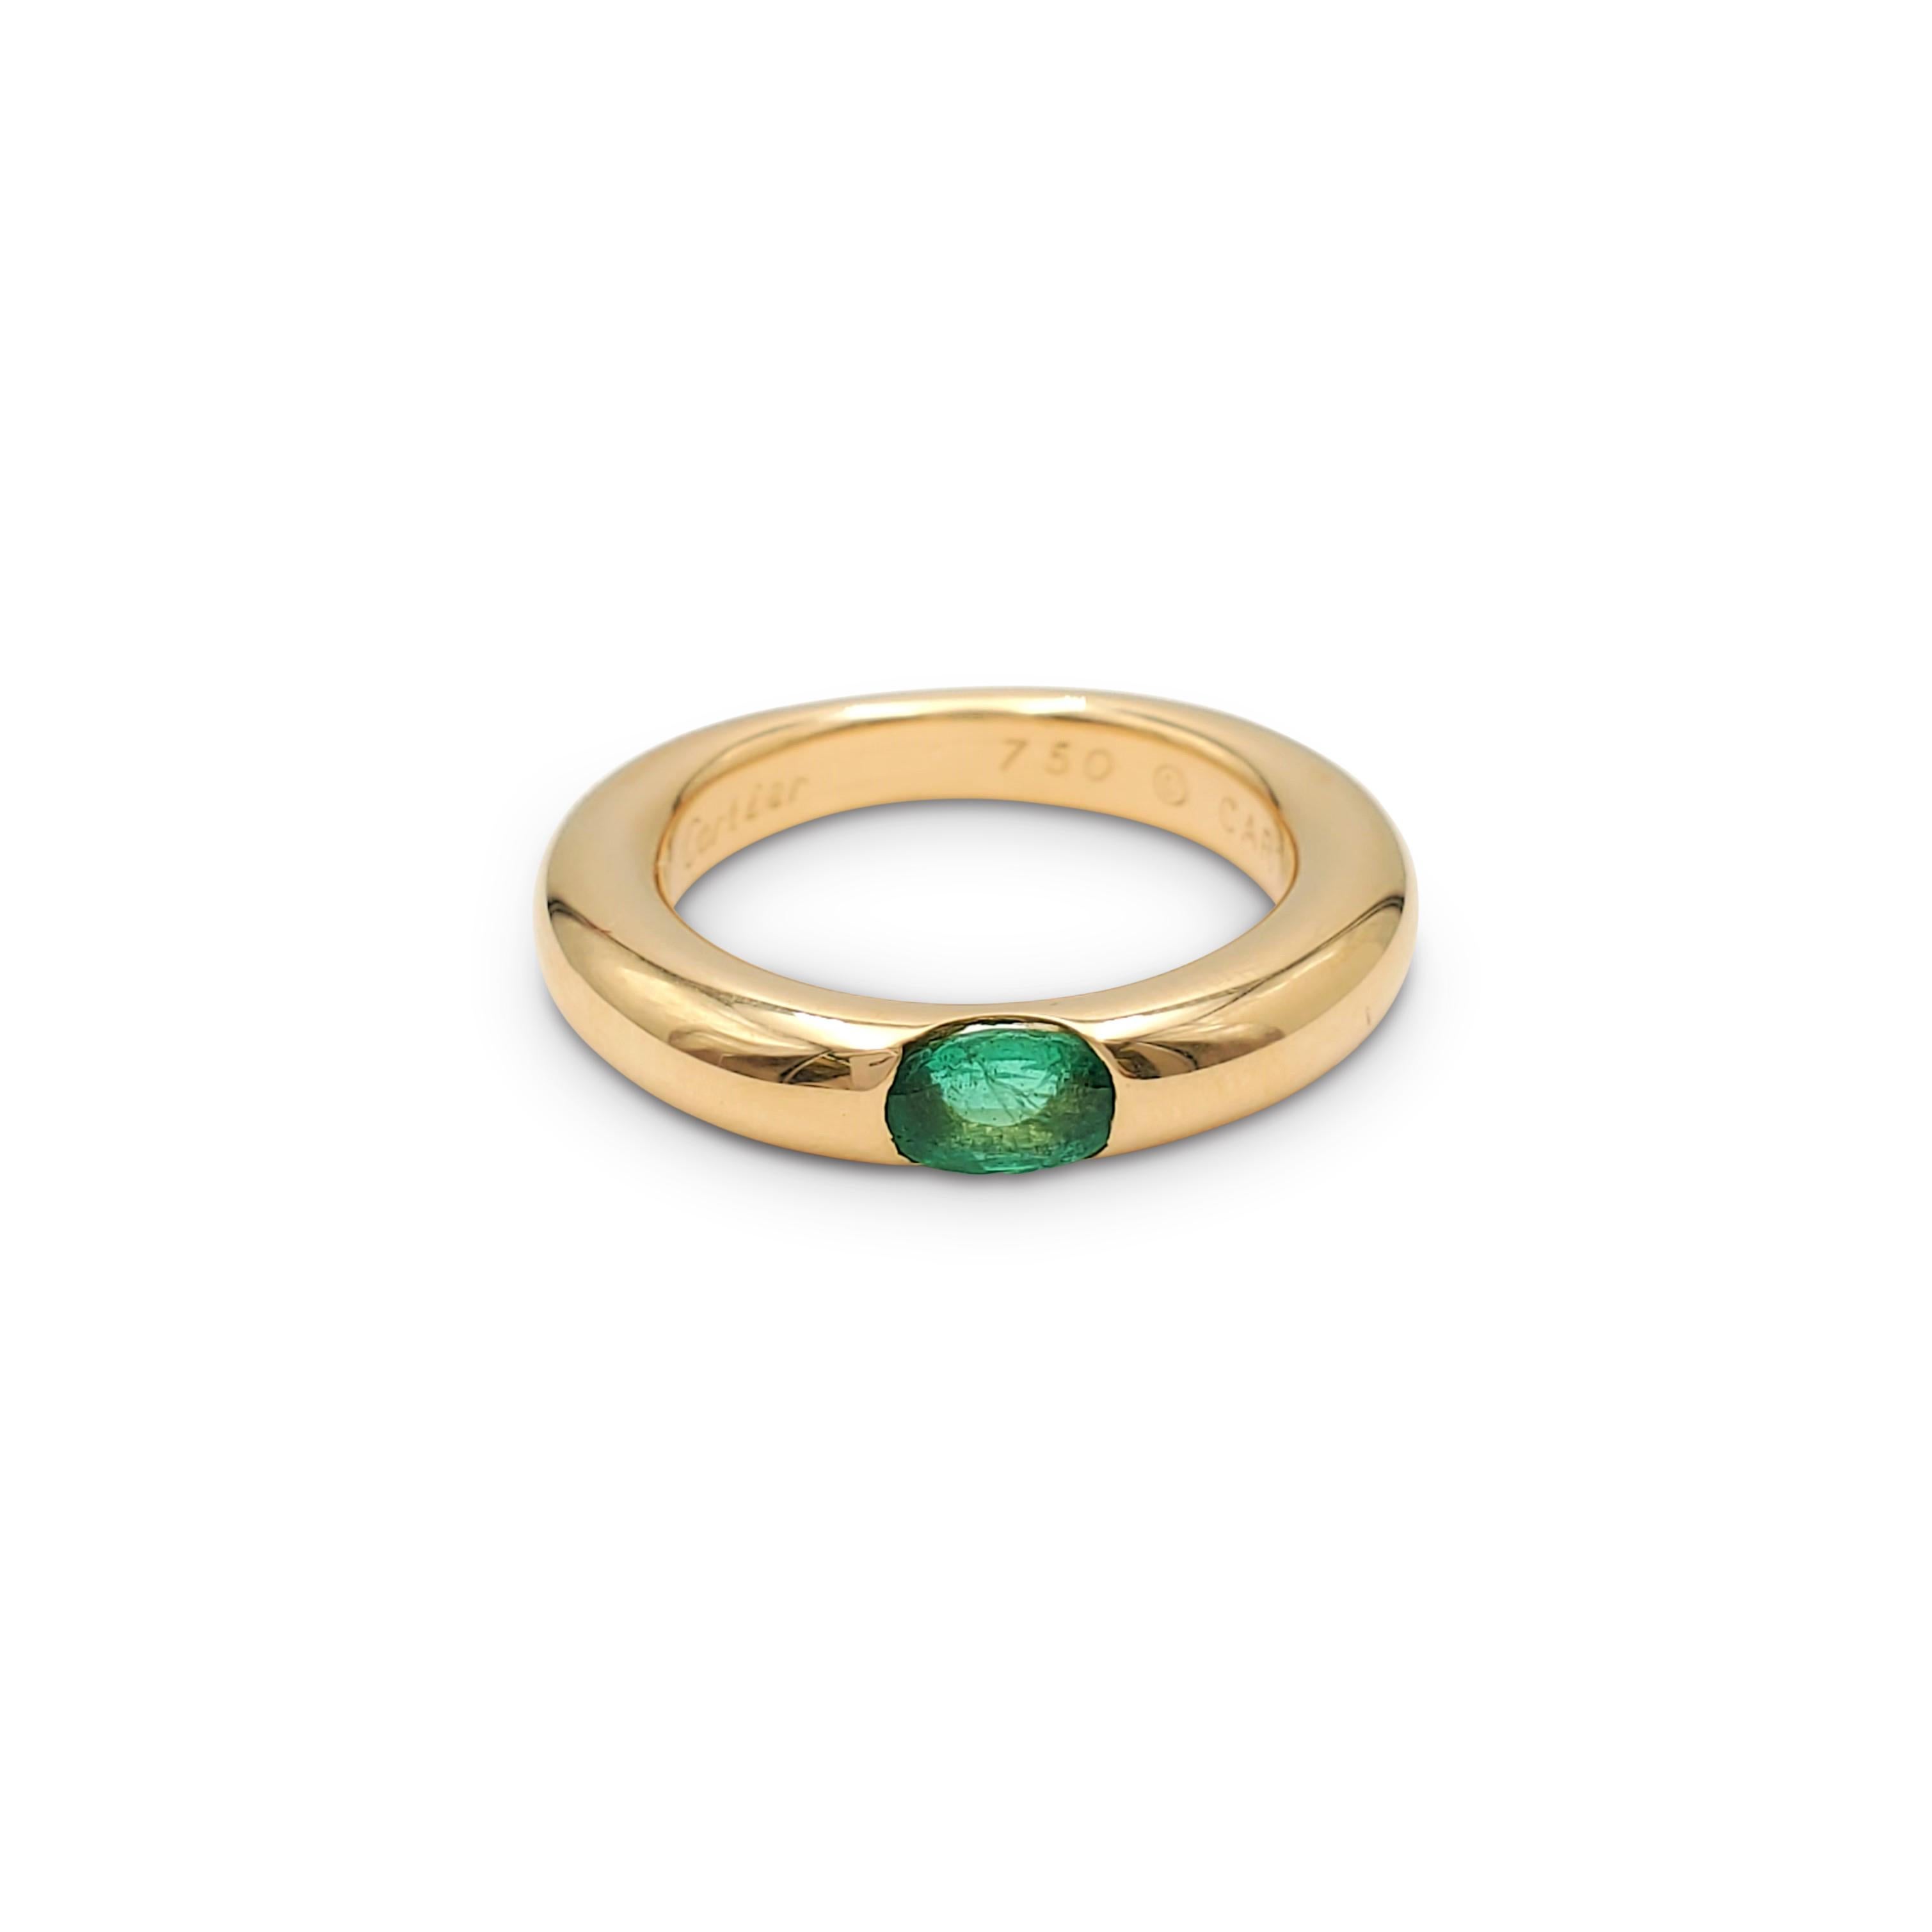 Authentic Cartier 'Ellipse' ring crafted in 18 karat yellow gold and set with one emerald stone weighing an estimated 0.35 carats total weight. Signed Cartier 1992, 750, 50, with serial number. The ring is presented with the original box and papers.